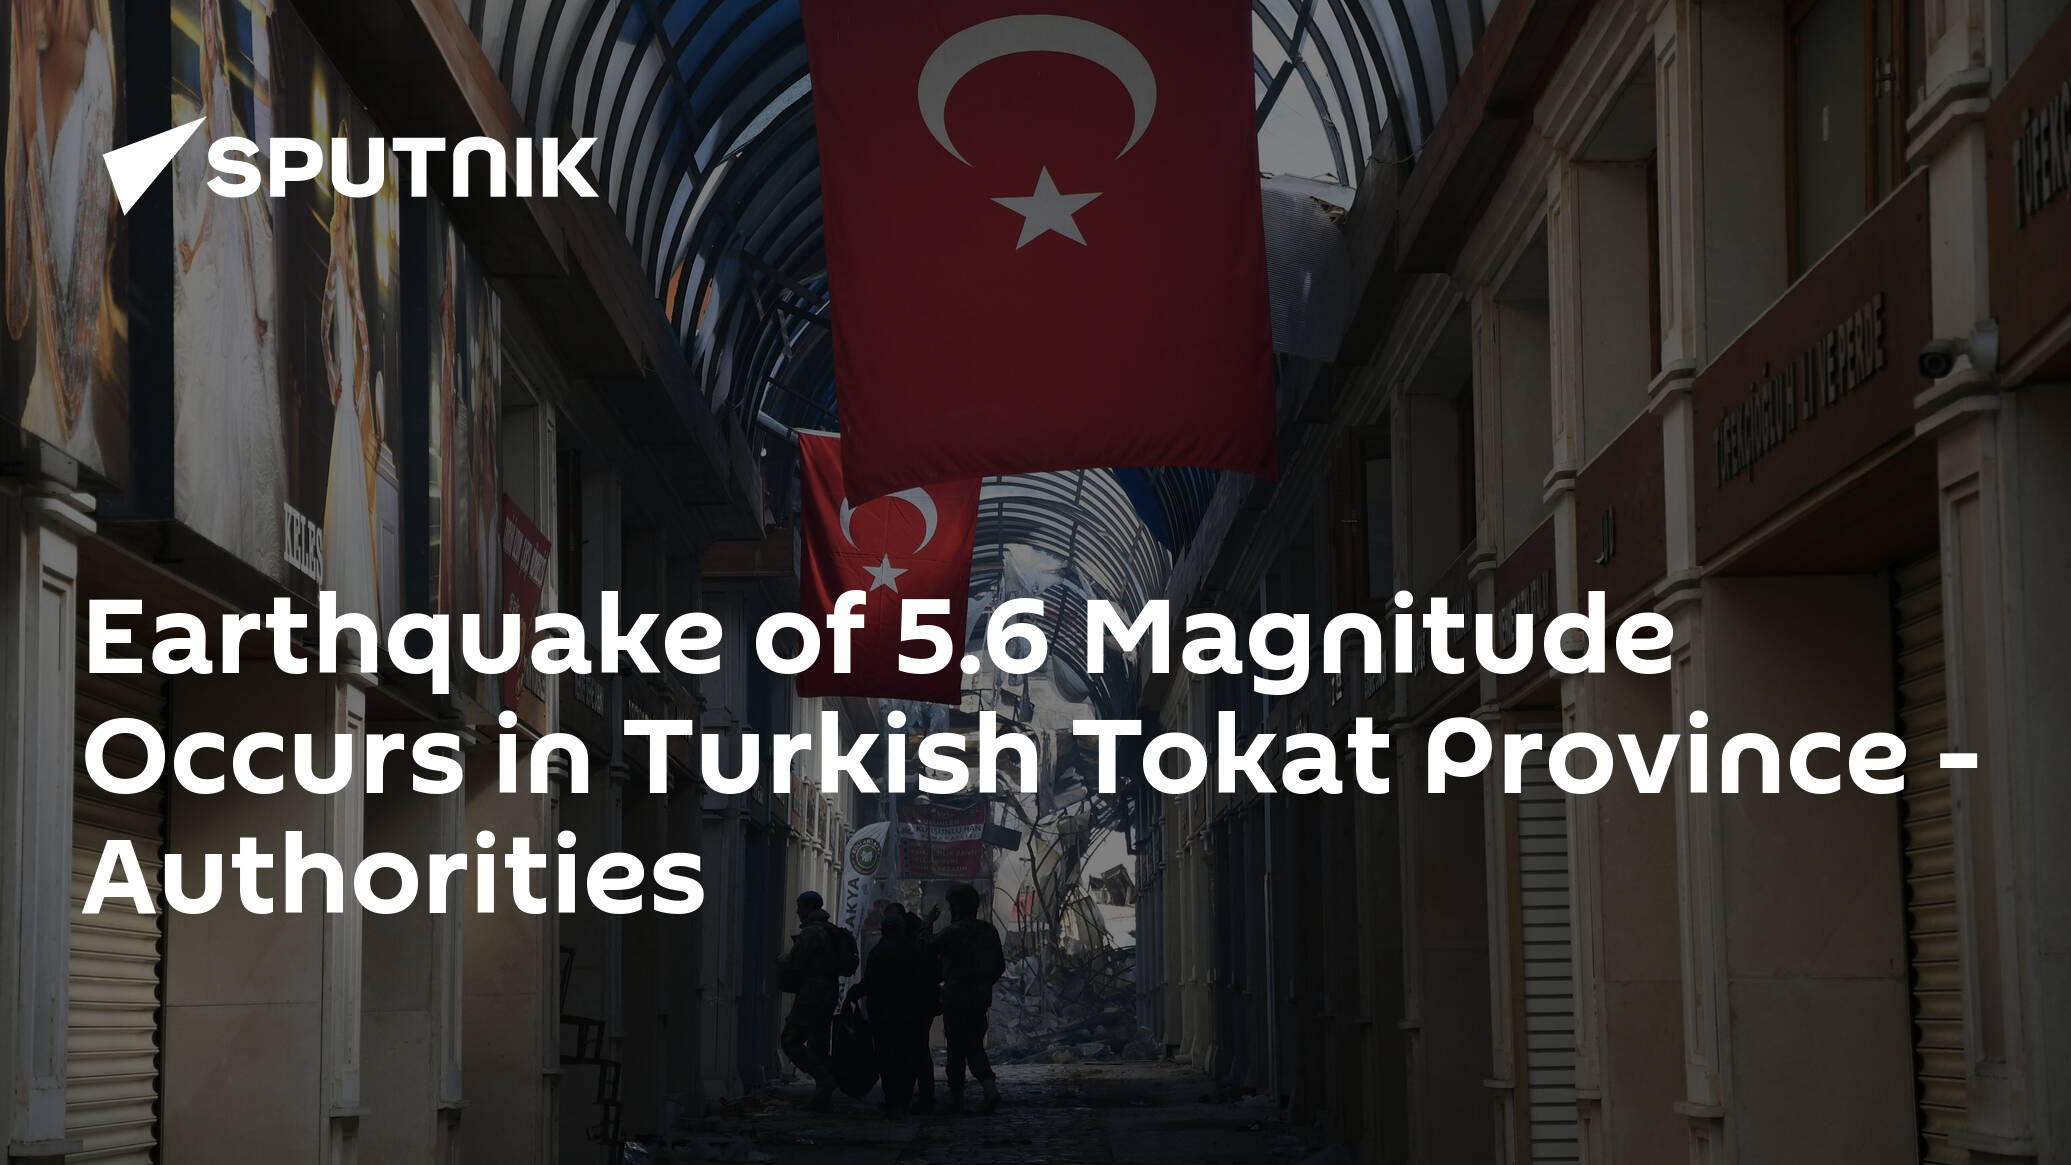 Earthquake of 5.6 Magnitude Occurs in Turkish Tokat Province – Authorities